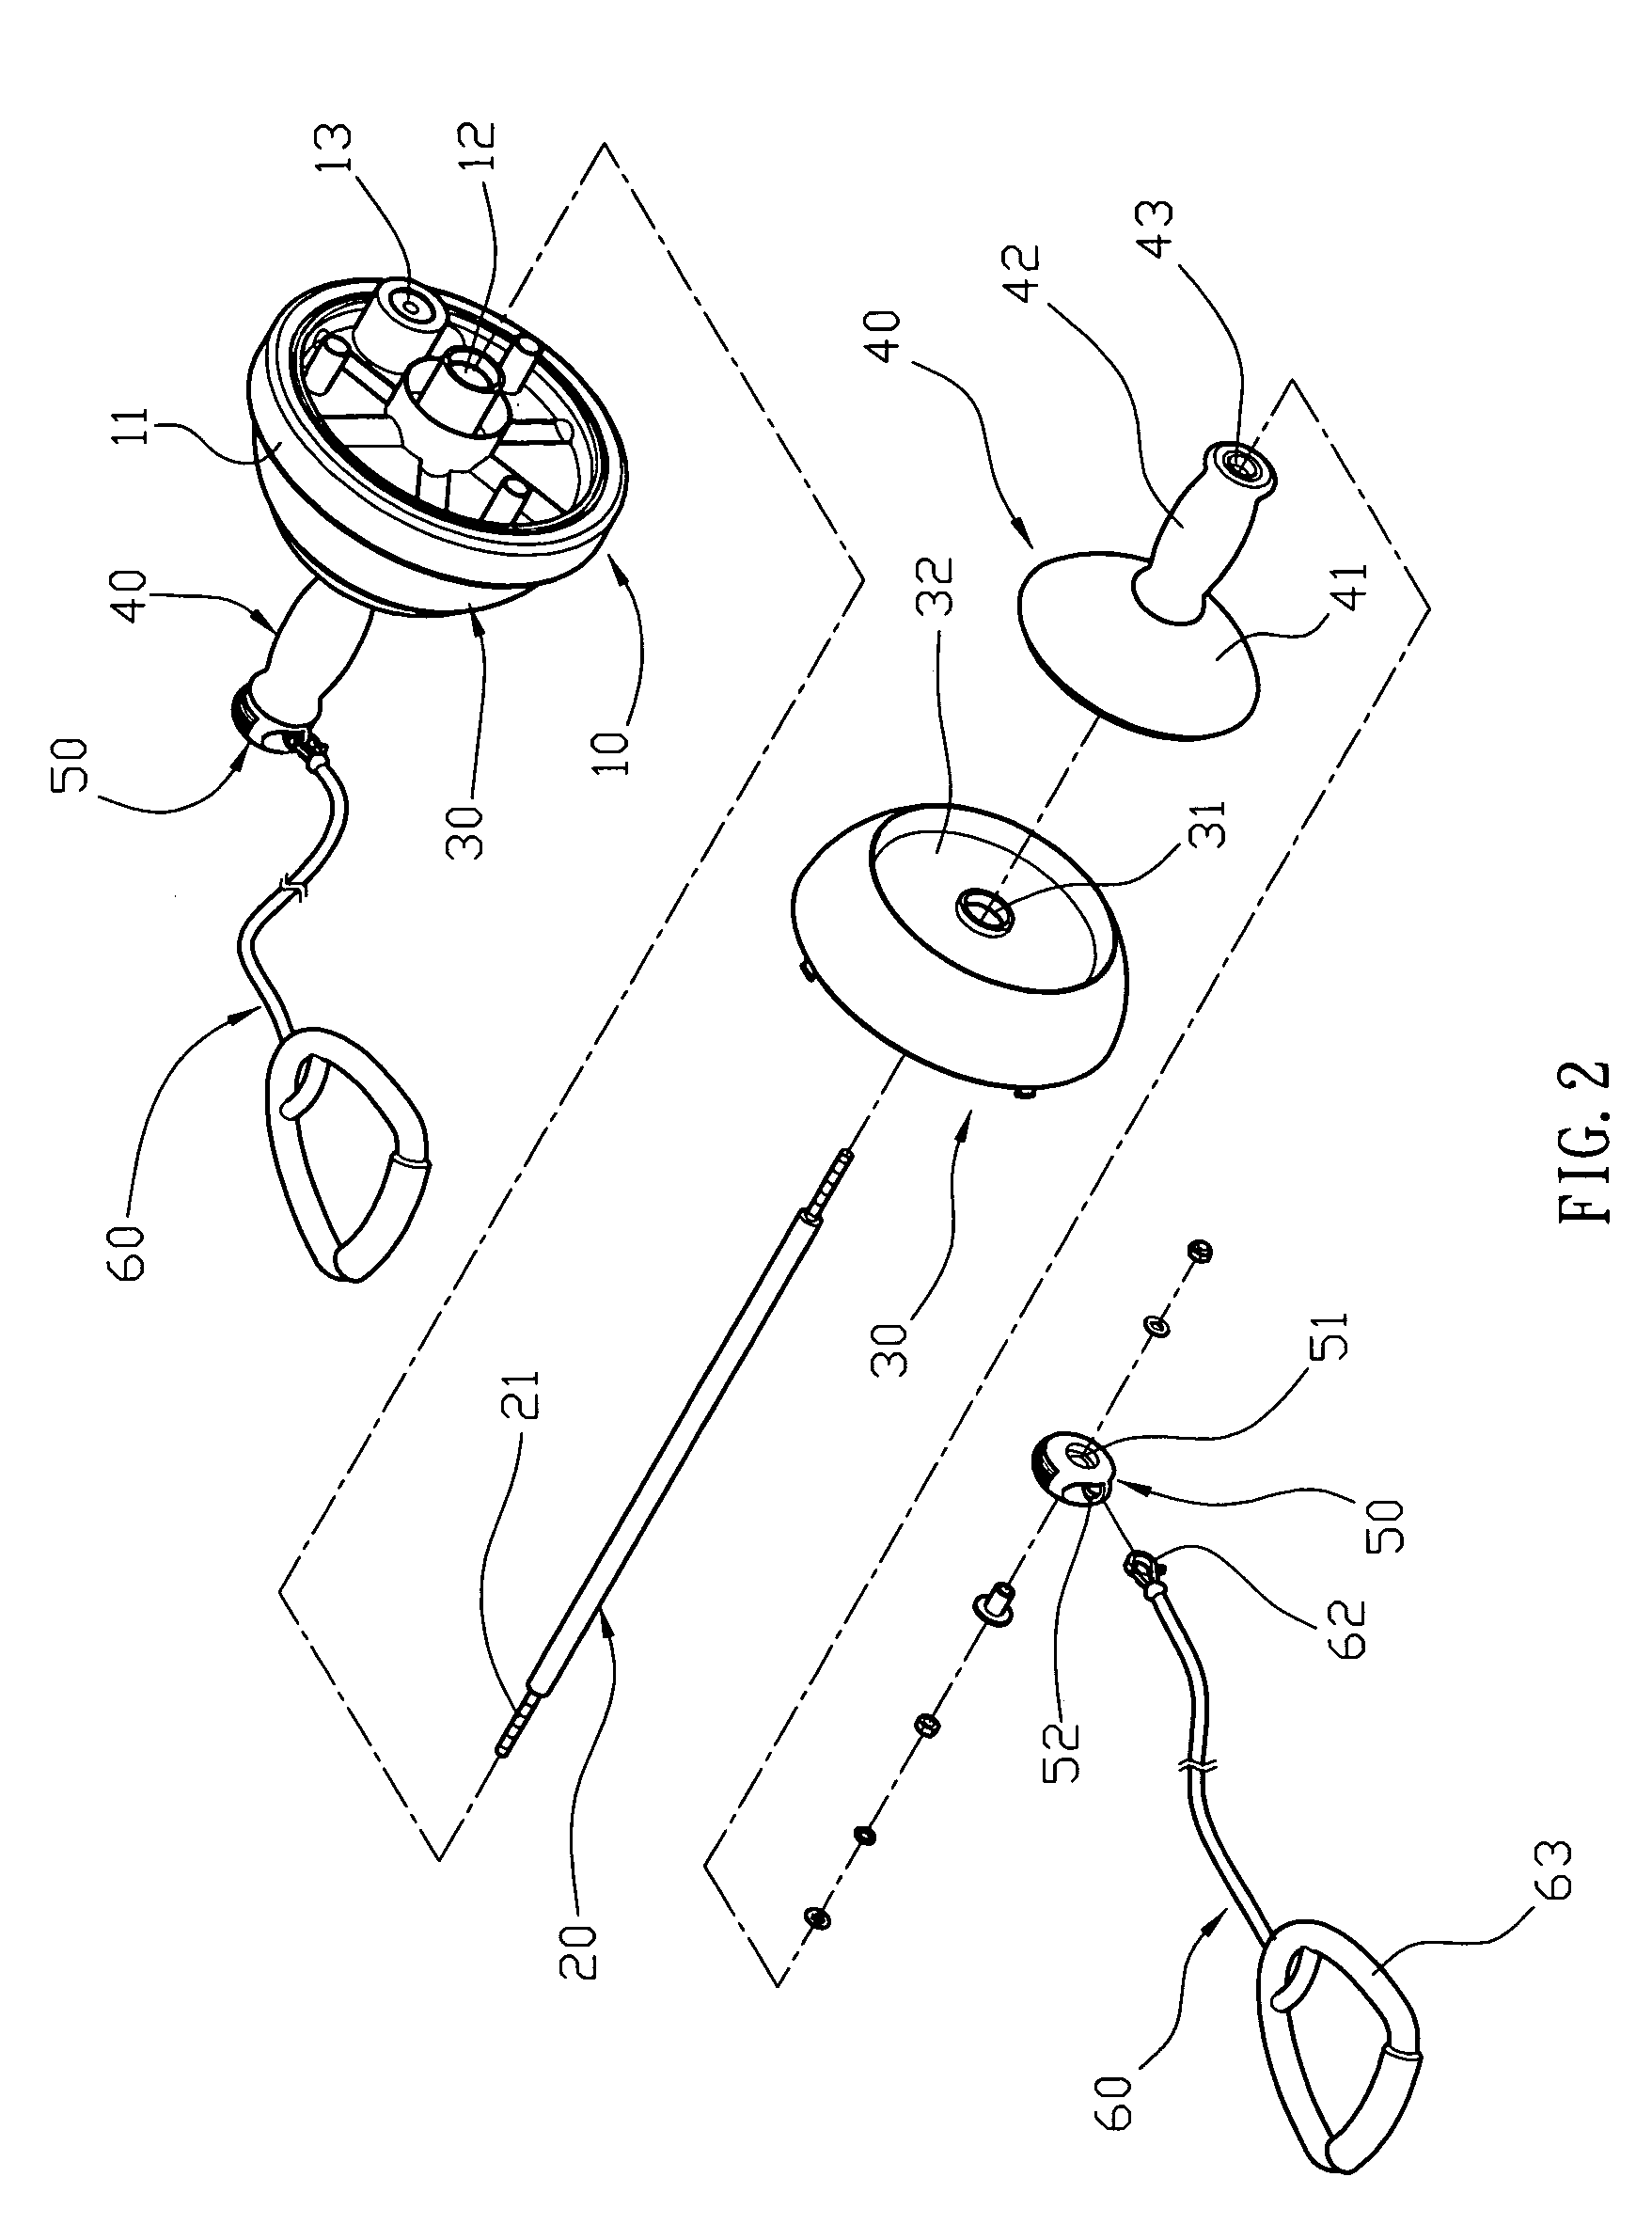 Exercising device having multiple functions